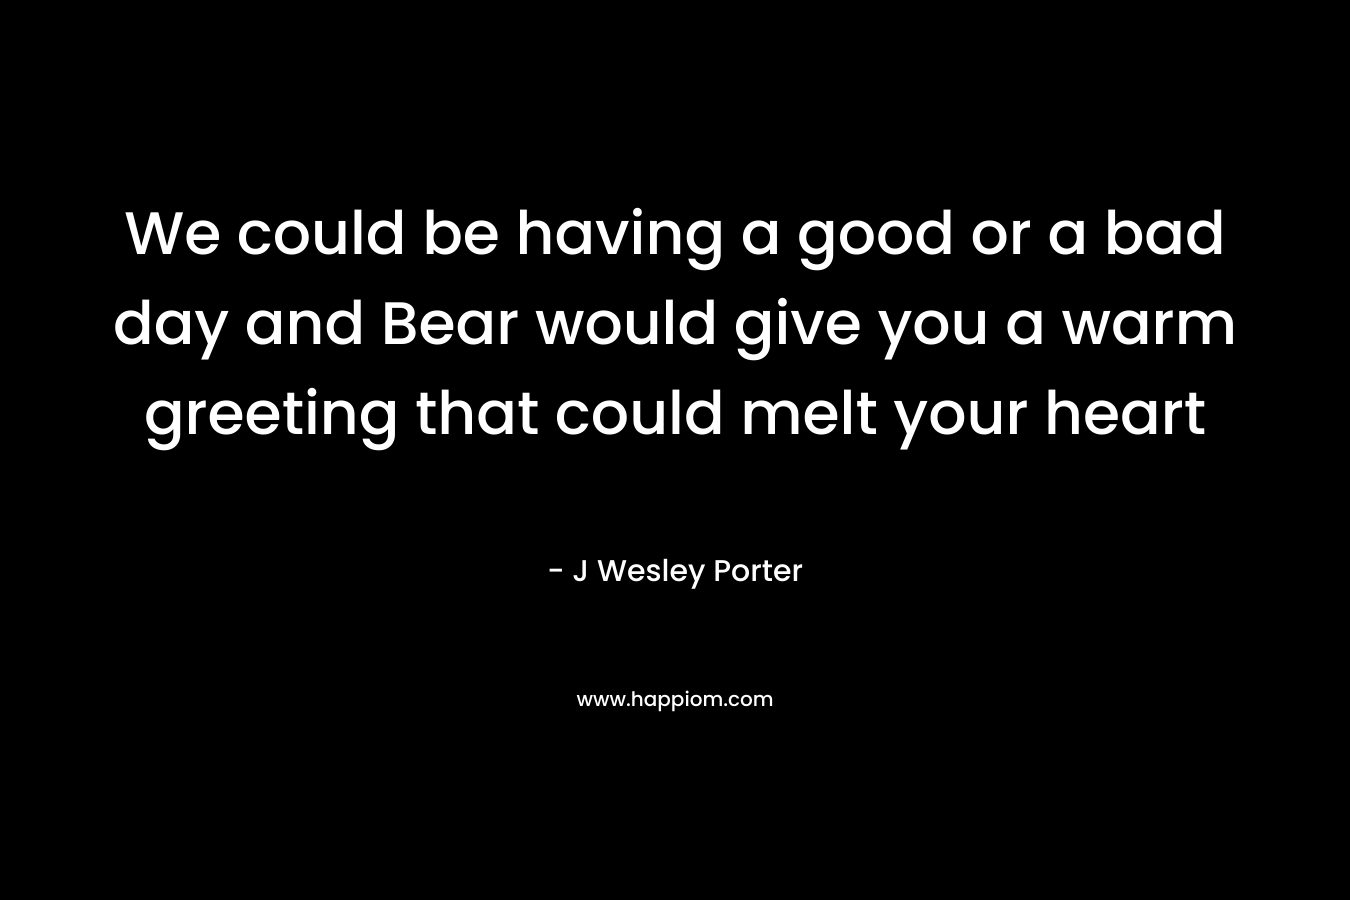 We could be having a good or a bad day and Bear would give you a warm greeting that could melt your heart – J Wesley Porter